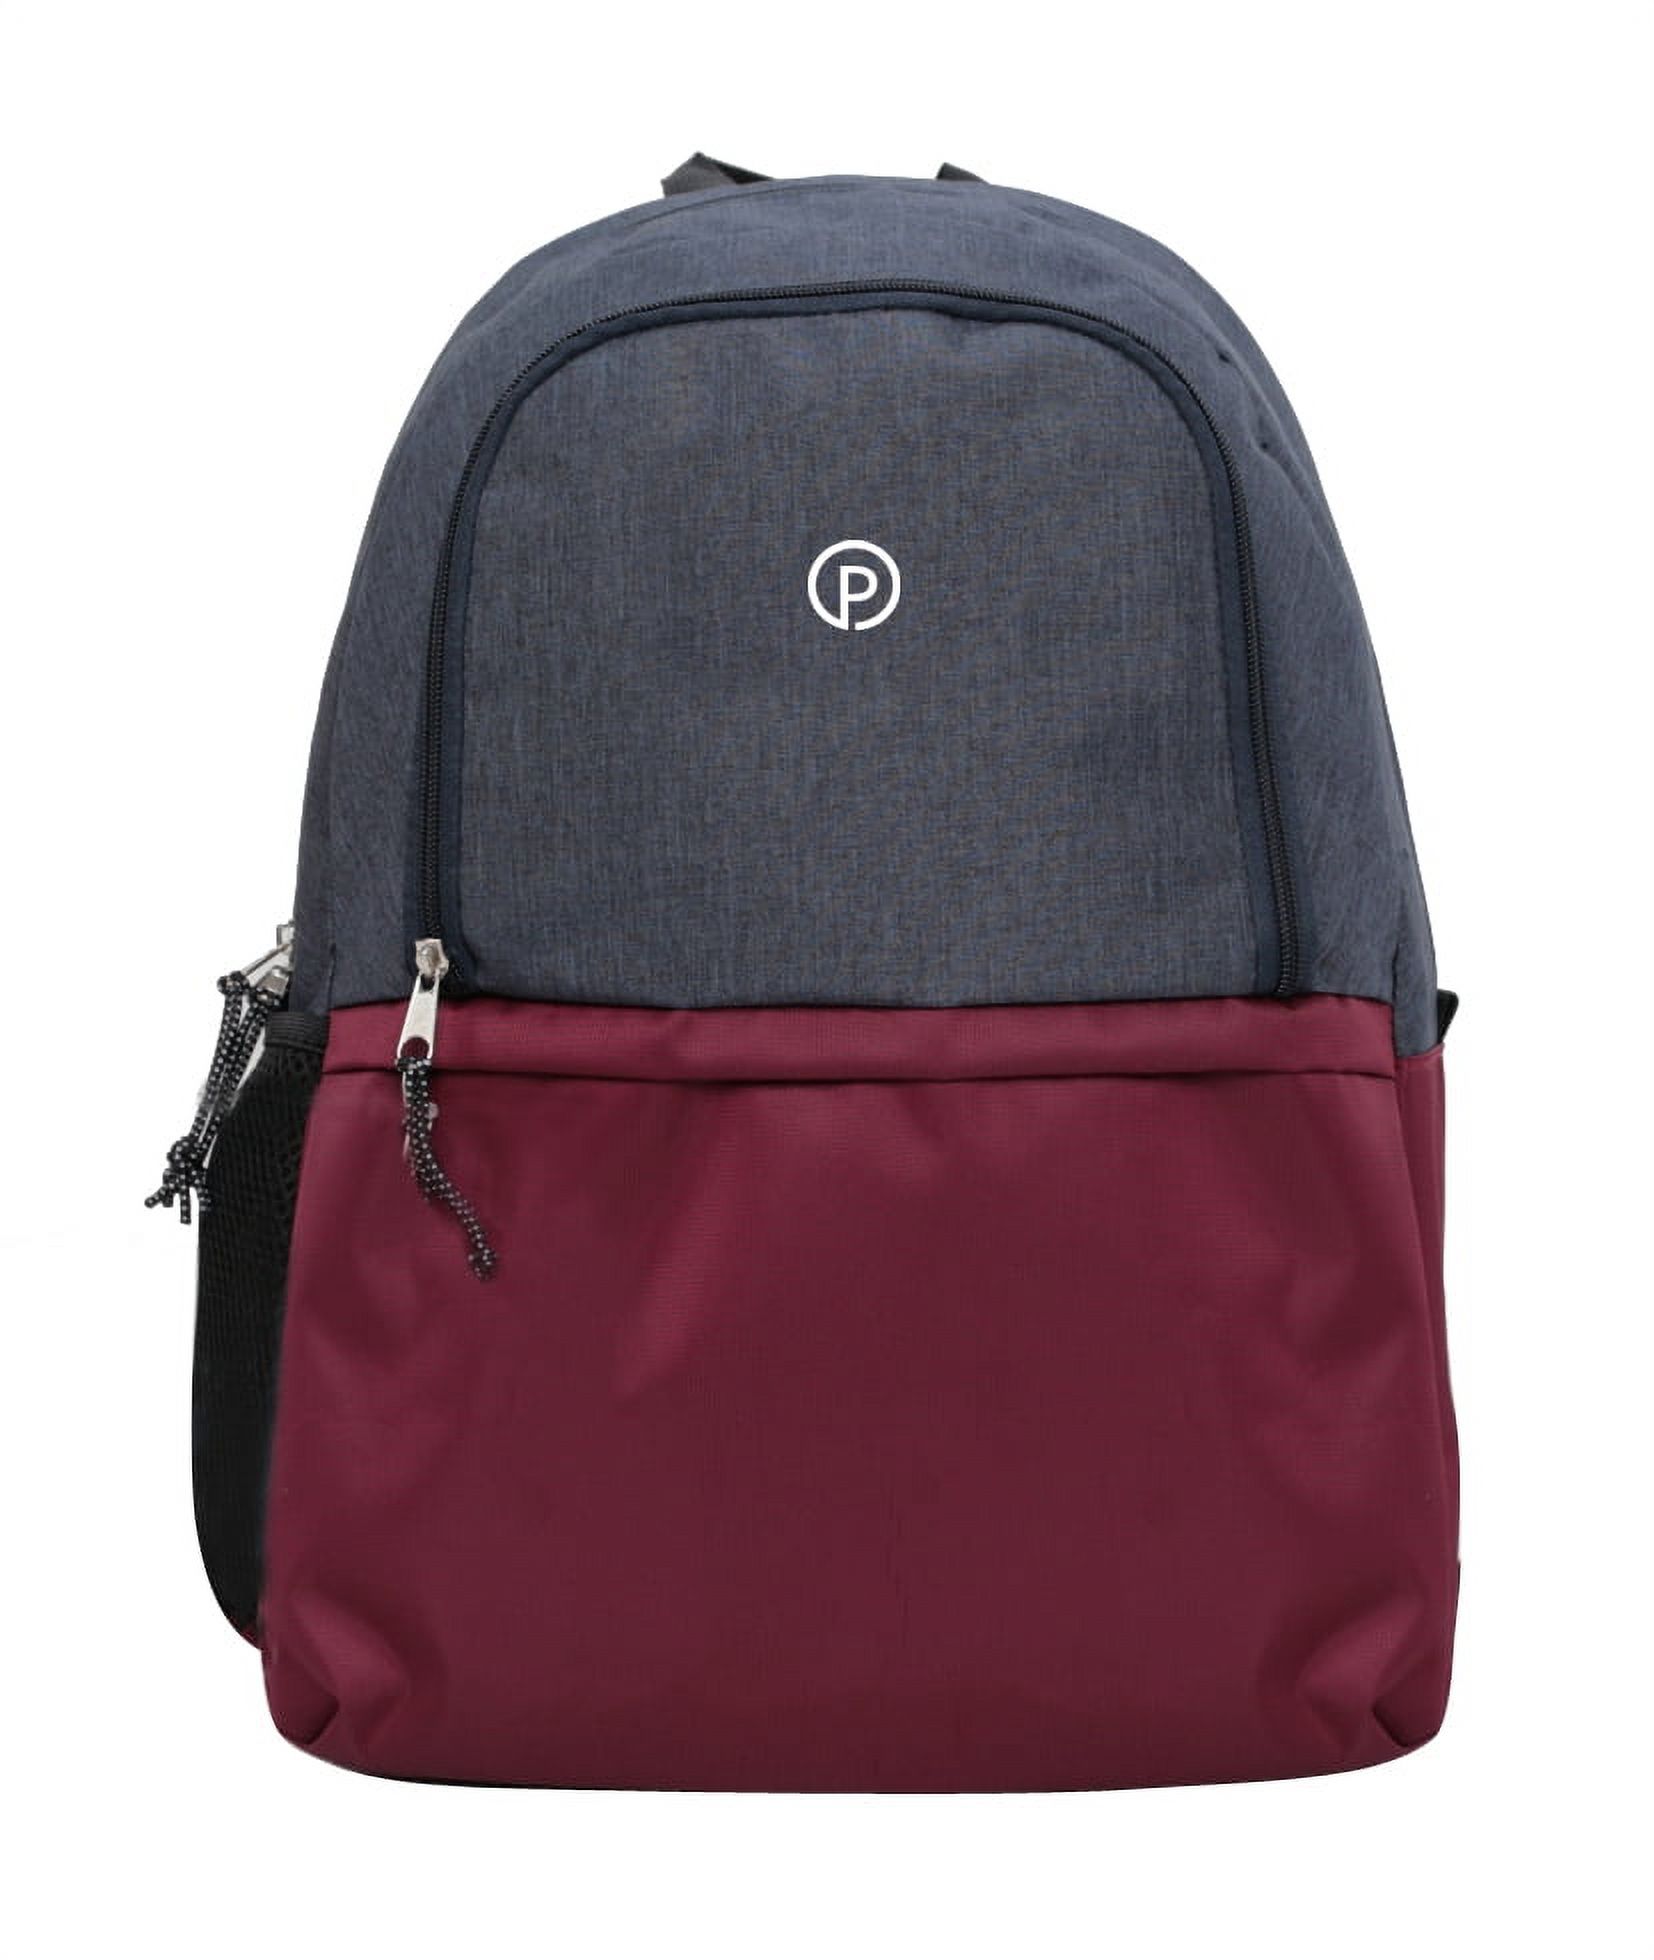 Protege 18" Heather Colorblock Adult Backpack, Navy/Maroon - Unisex - image 1 of 5